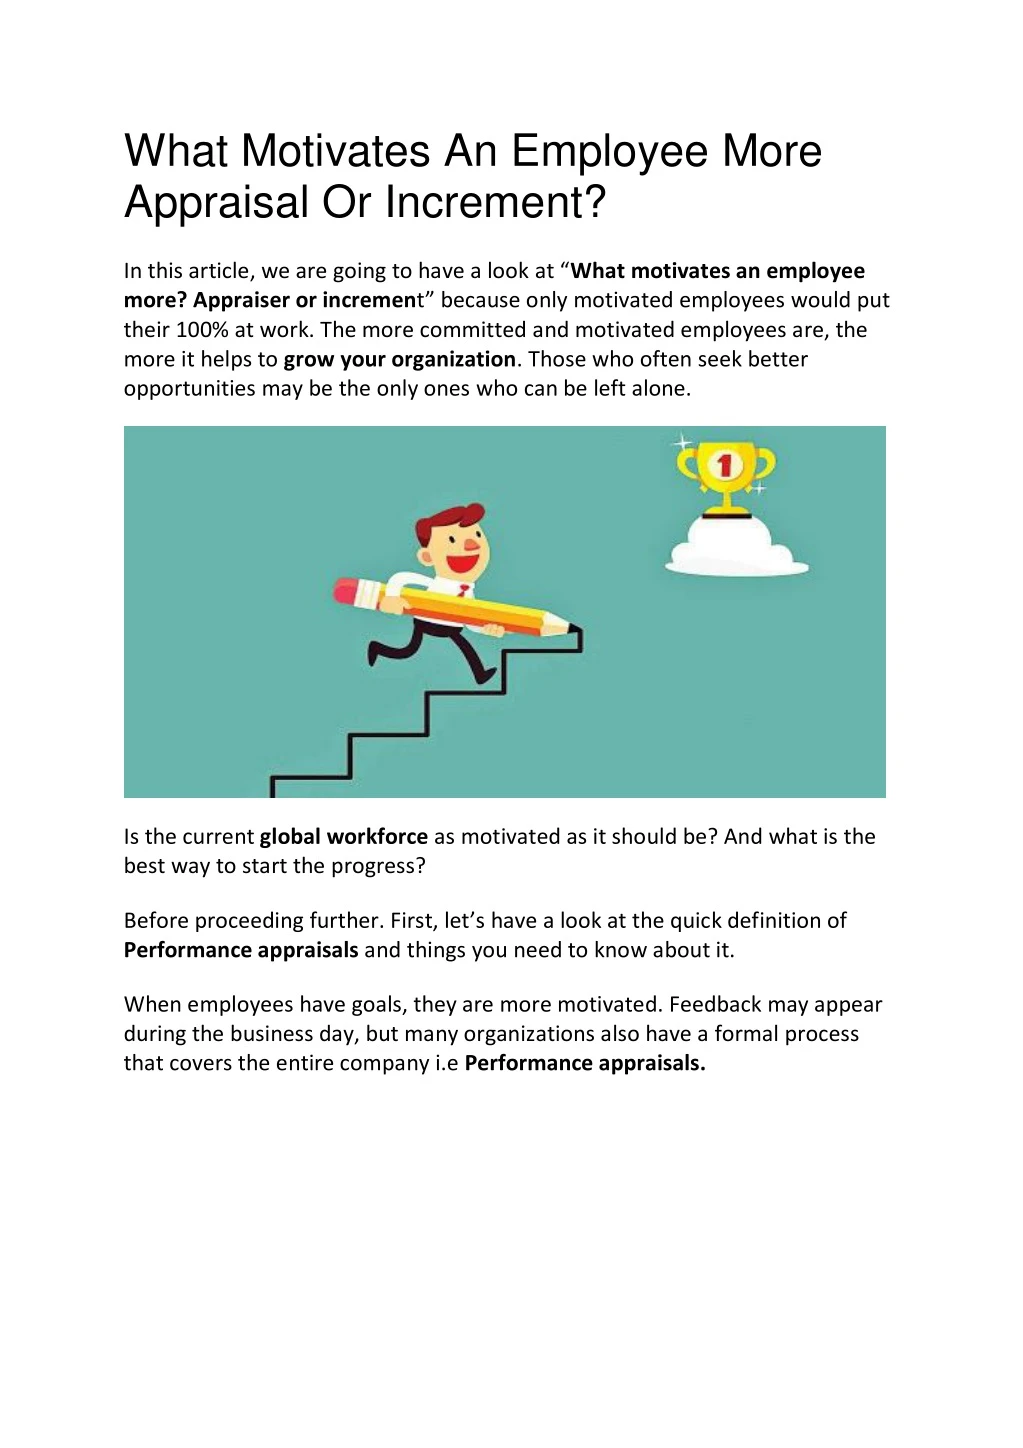 what motivates an employee more appraisal